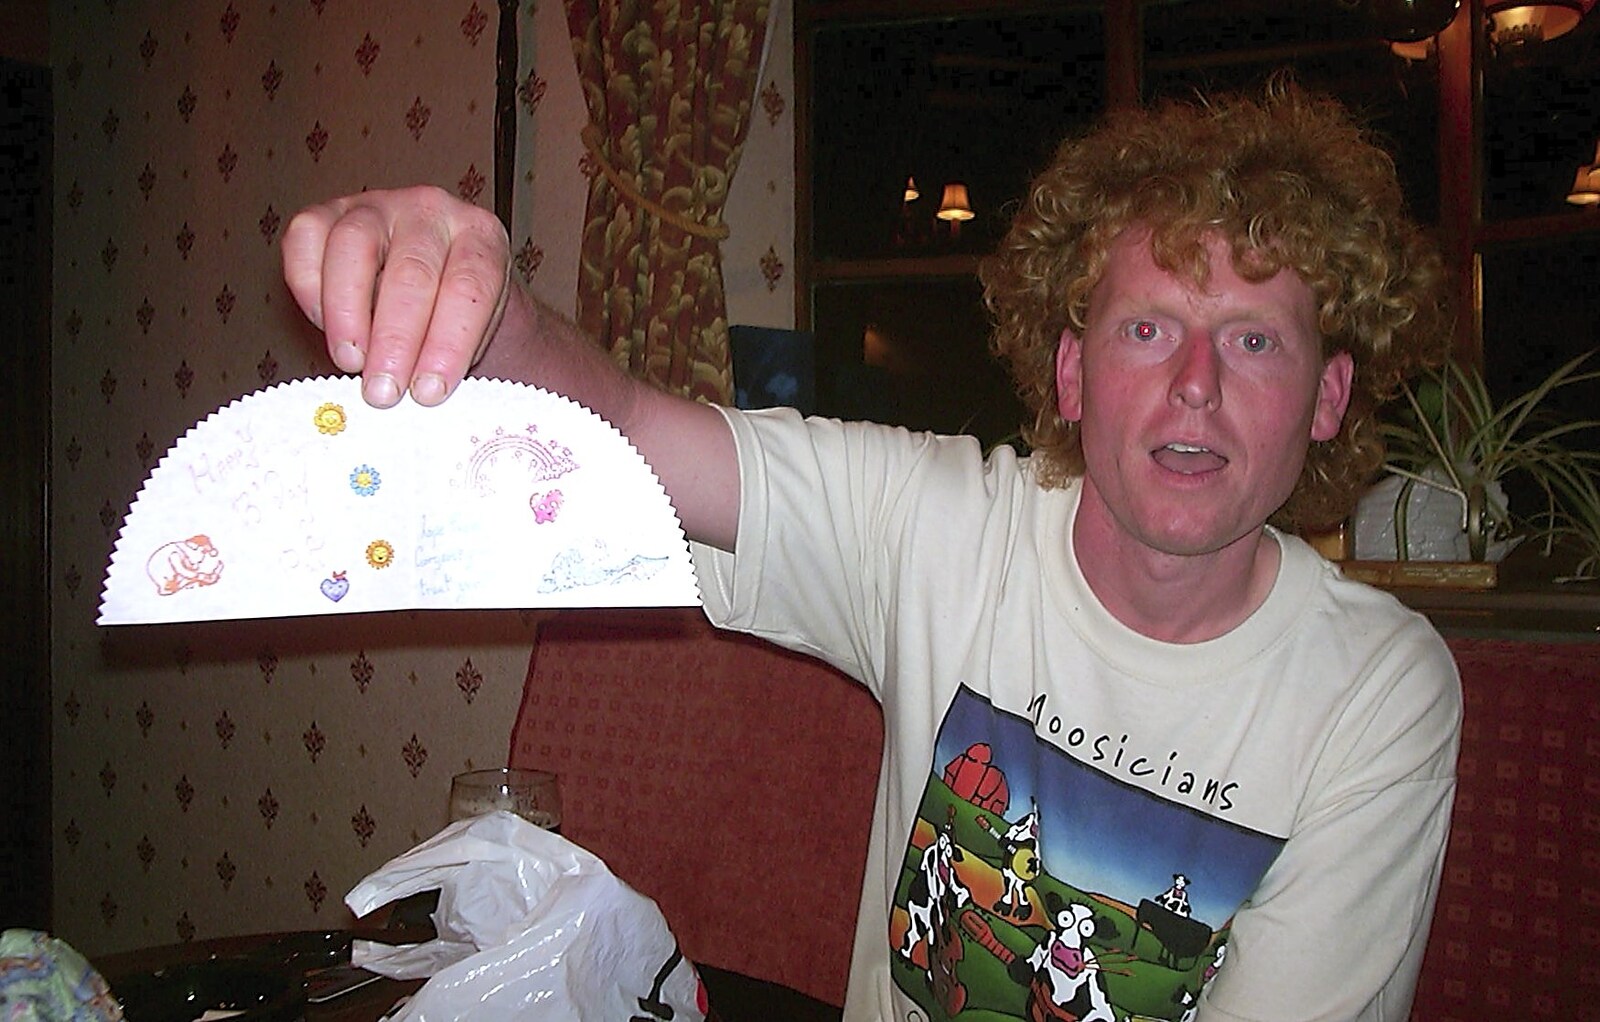 Wavy holds up his creation from Wavy's Birthday at the Swan Inn, Brome, Suffolk - 24th May 2004